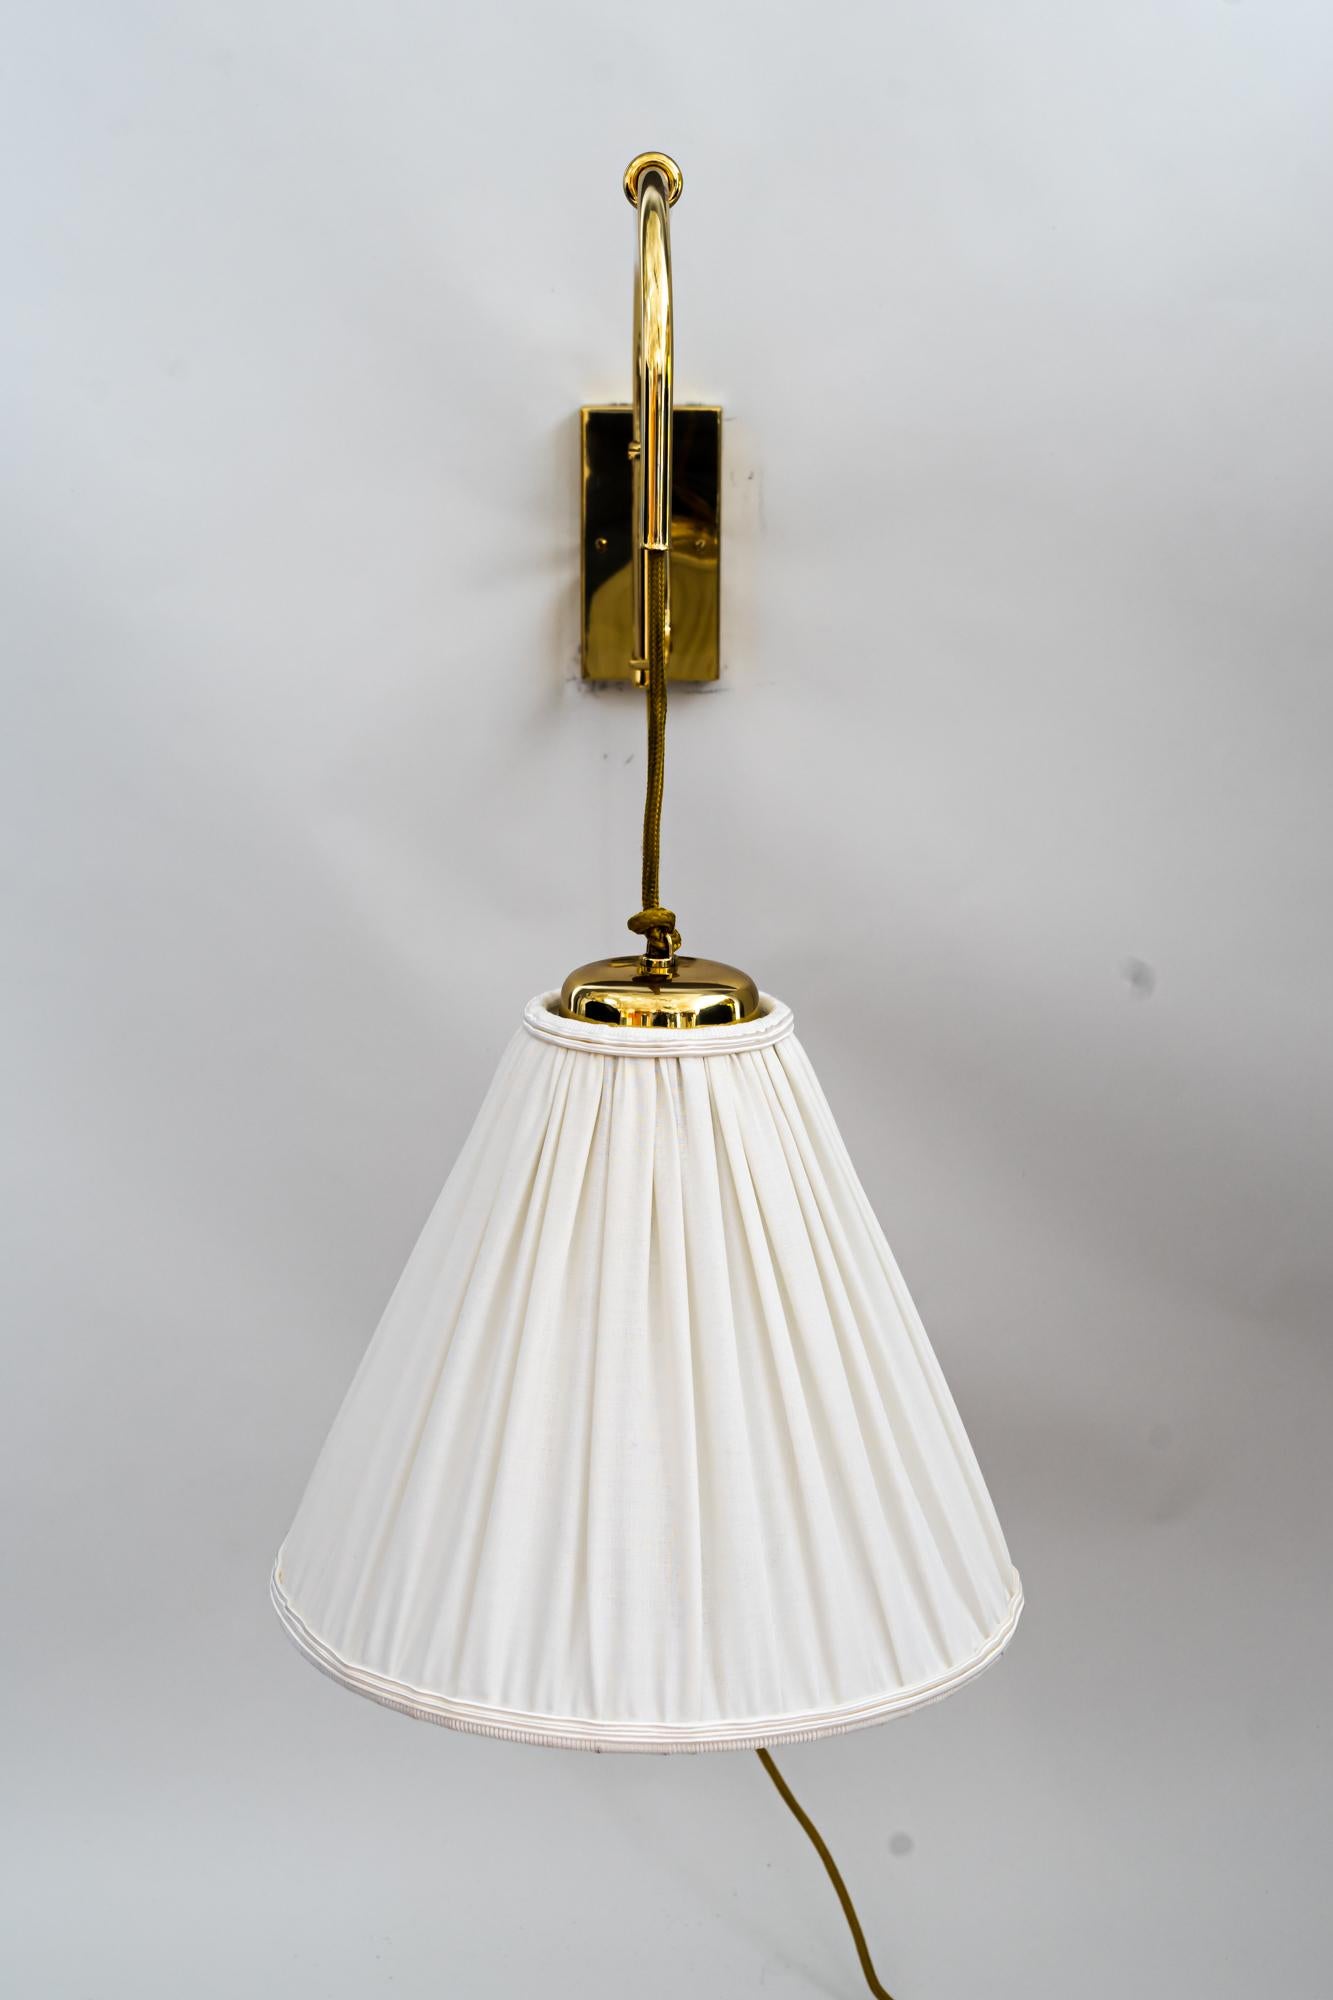 Adjustable kalmar wall lamp with fabric shade around 1950s
Adjustable from 80cm - 113cm
Original condition
Shade is replaced ( new ).